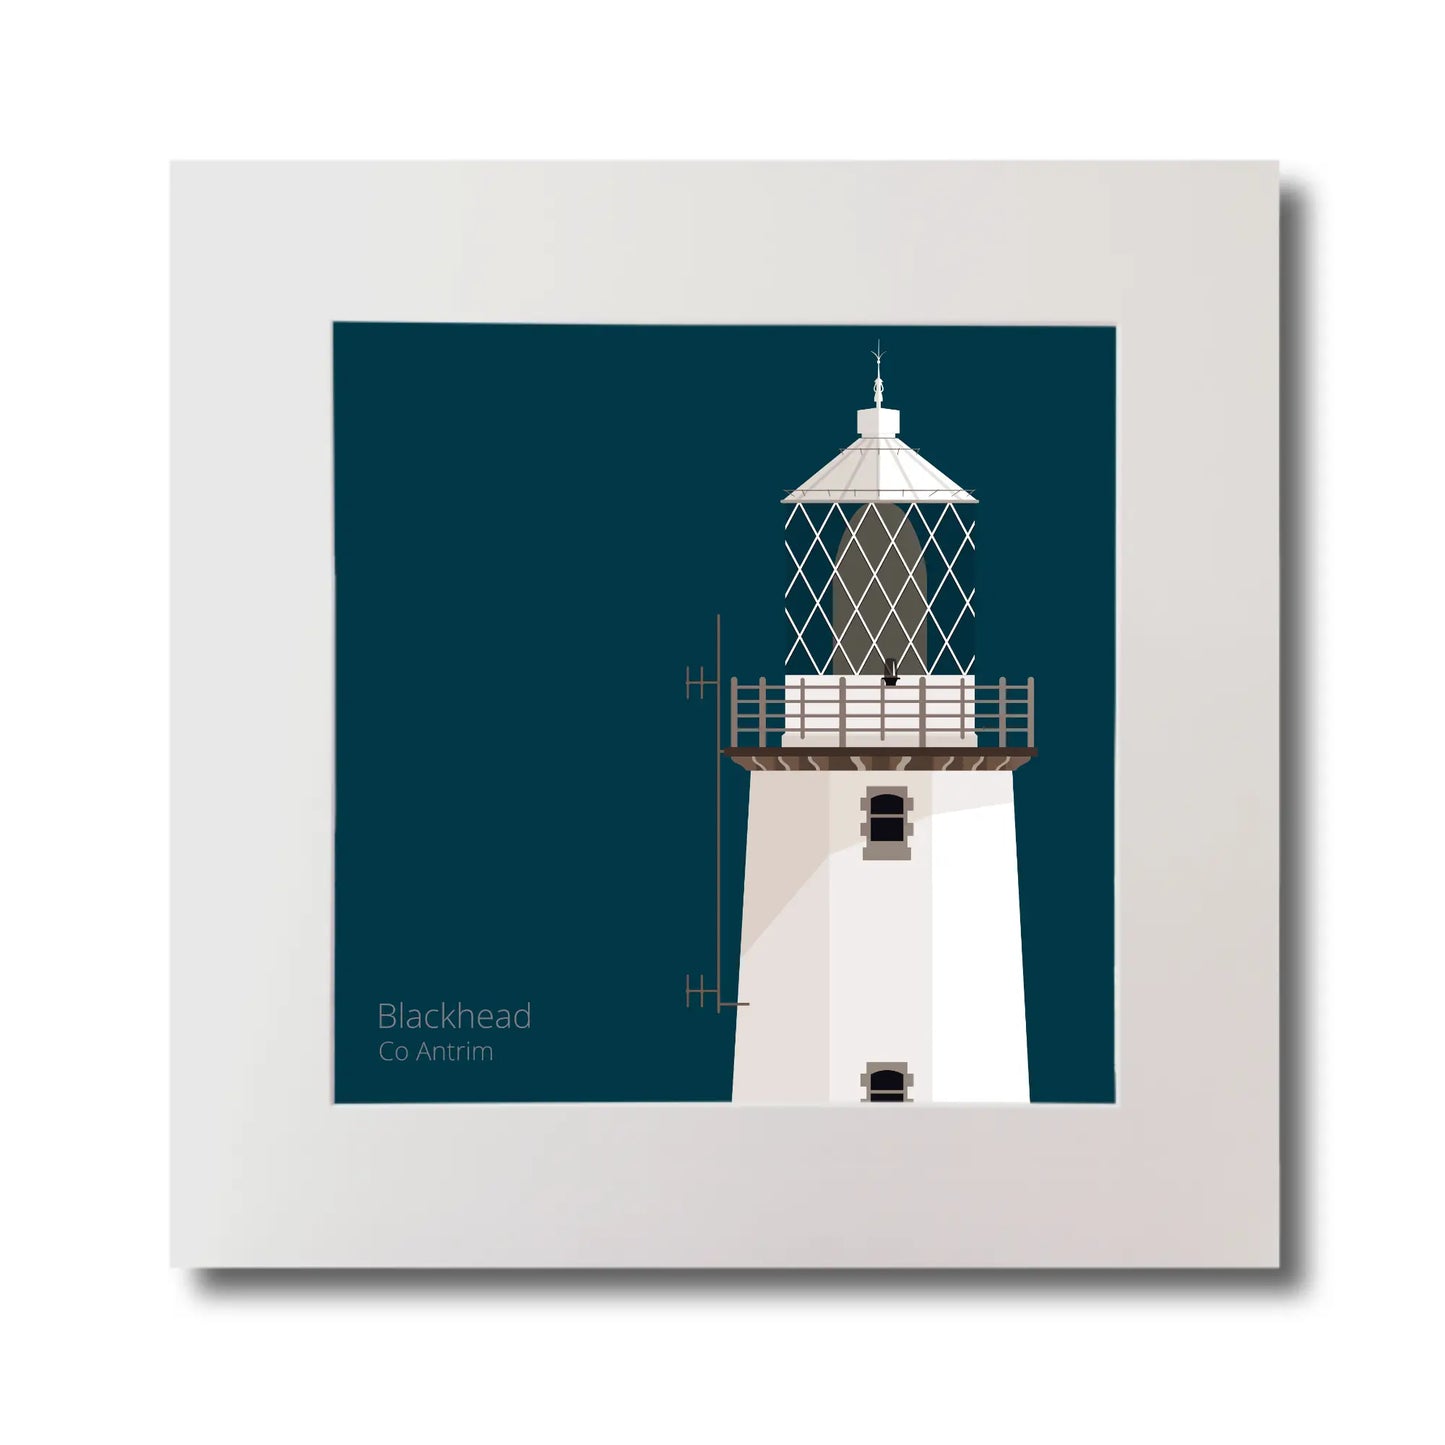 Illustration of Blackhead lighthouse on a midnight blue background, mounted and measuring 30x30cm.